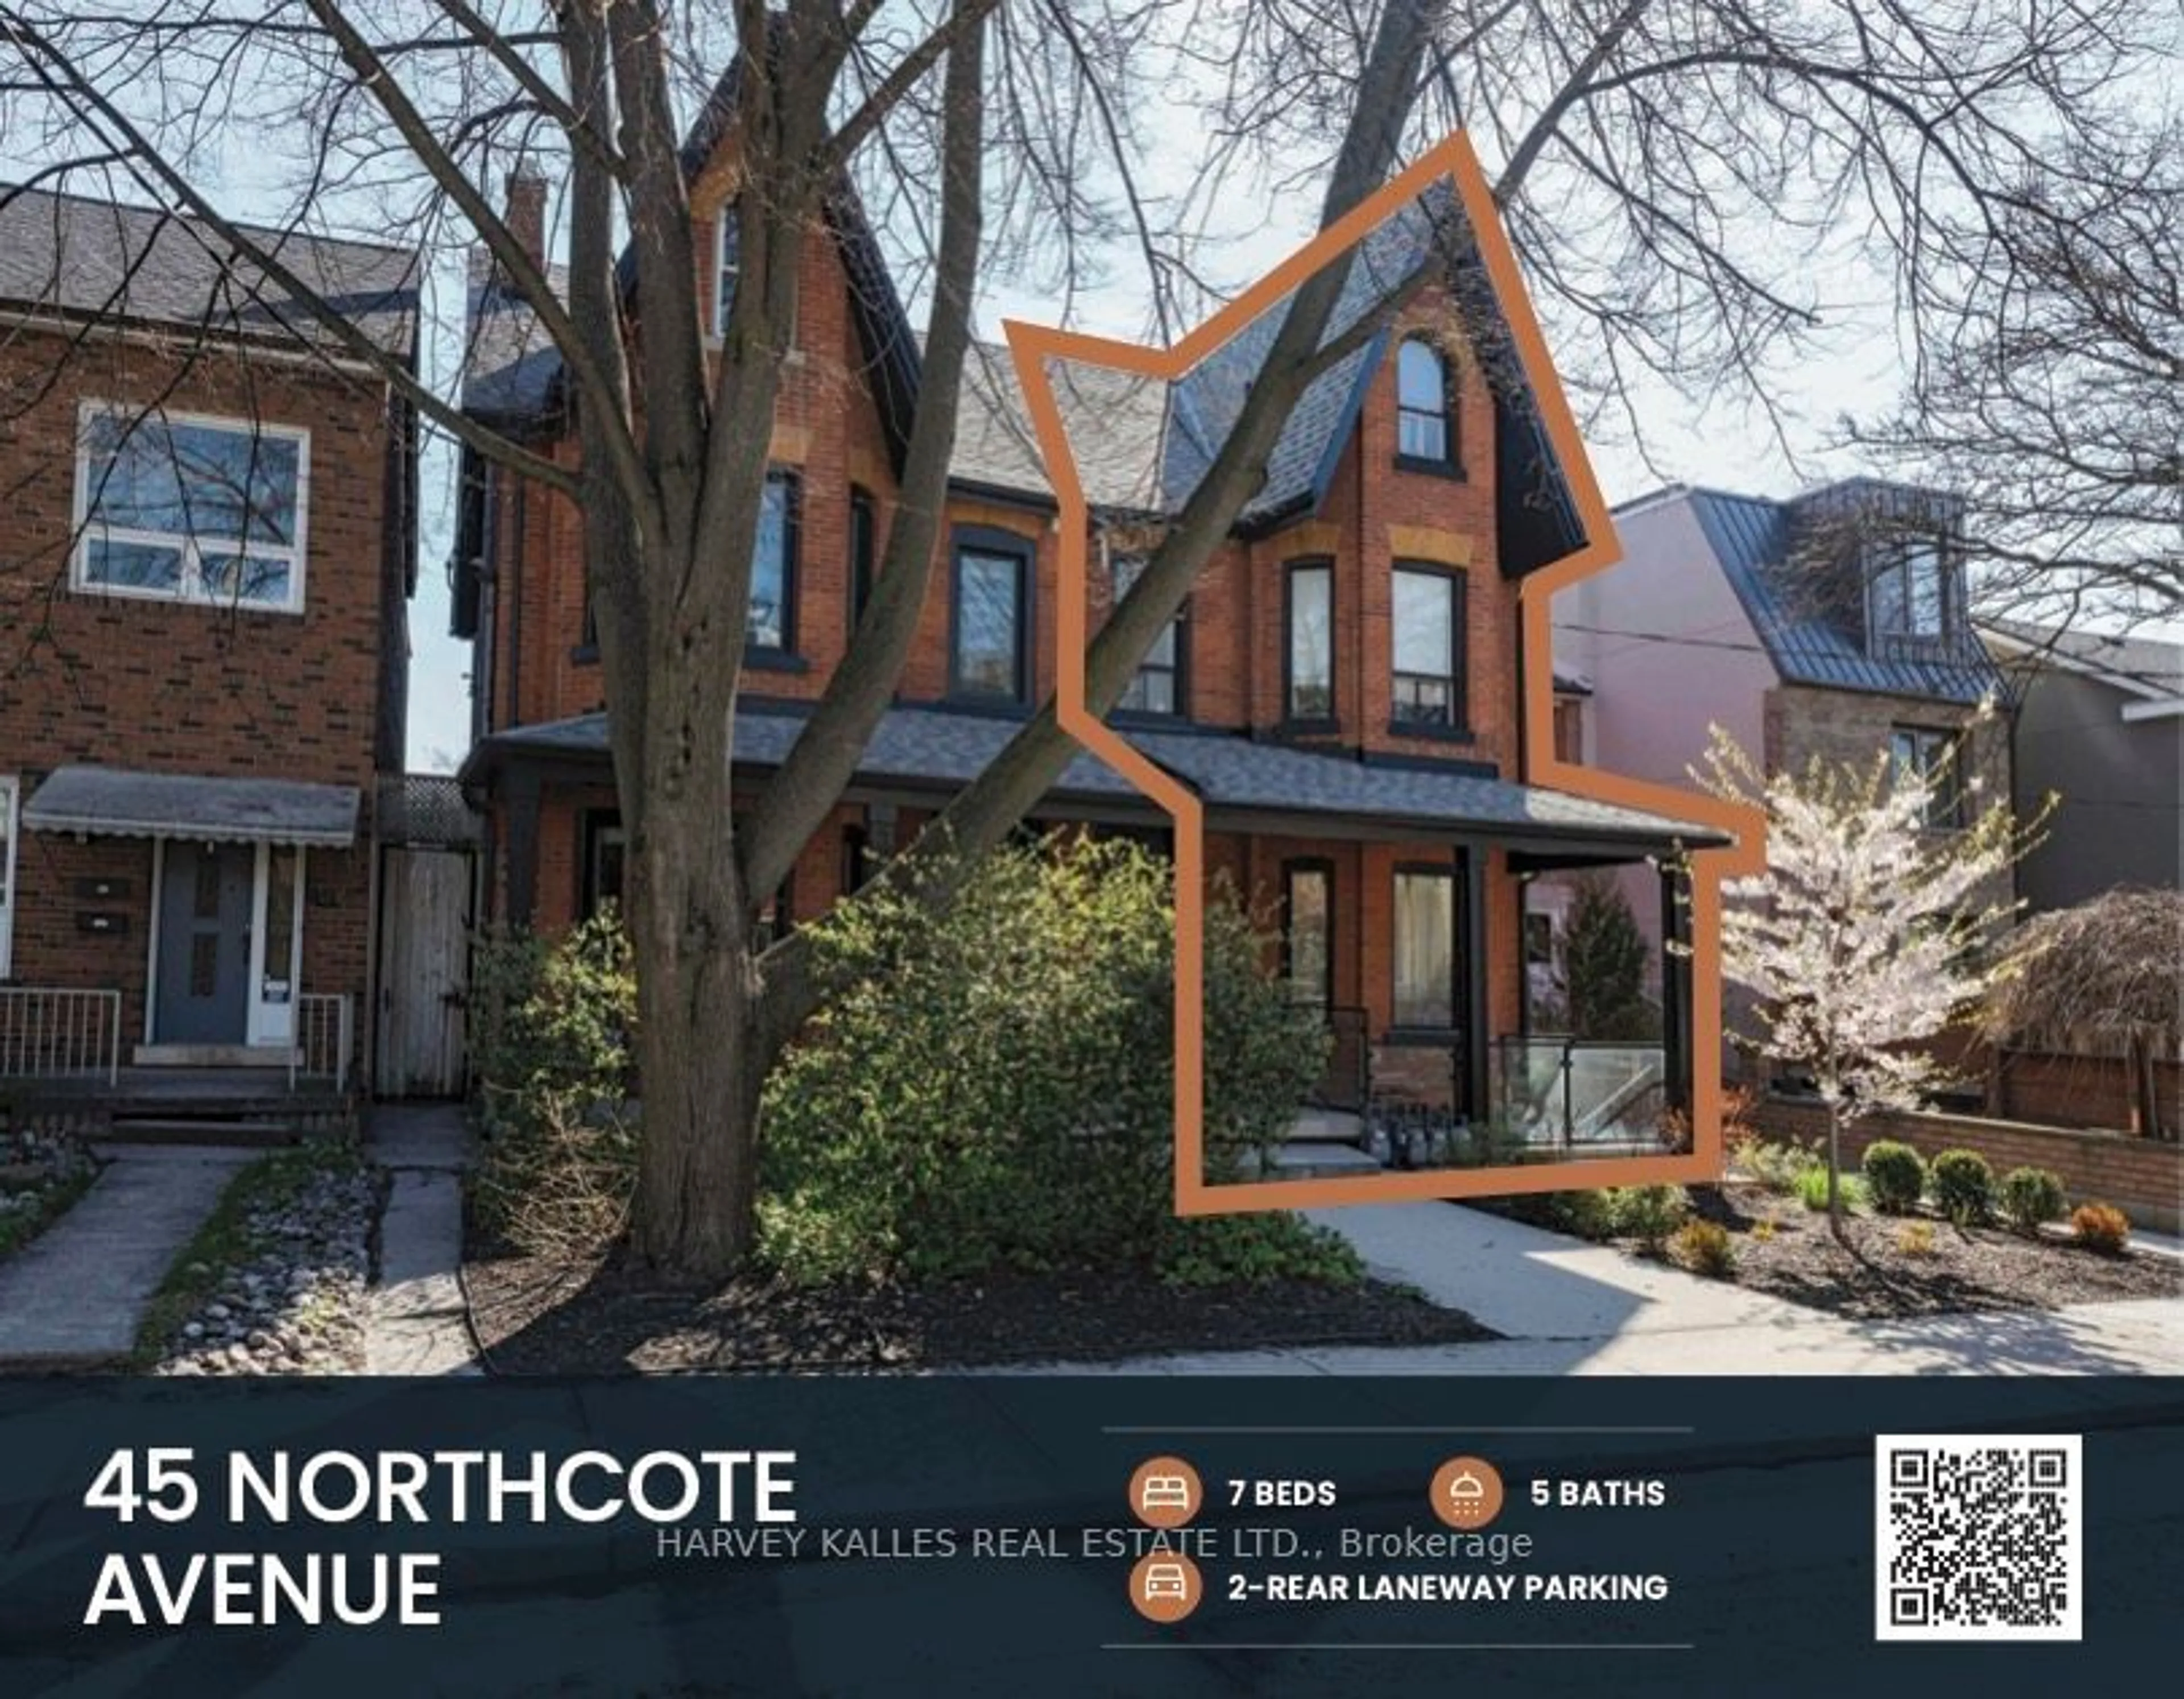 Frontside or backside of a home for 45 Northcote Ave, Toronto Ontario M6J 3K2